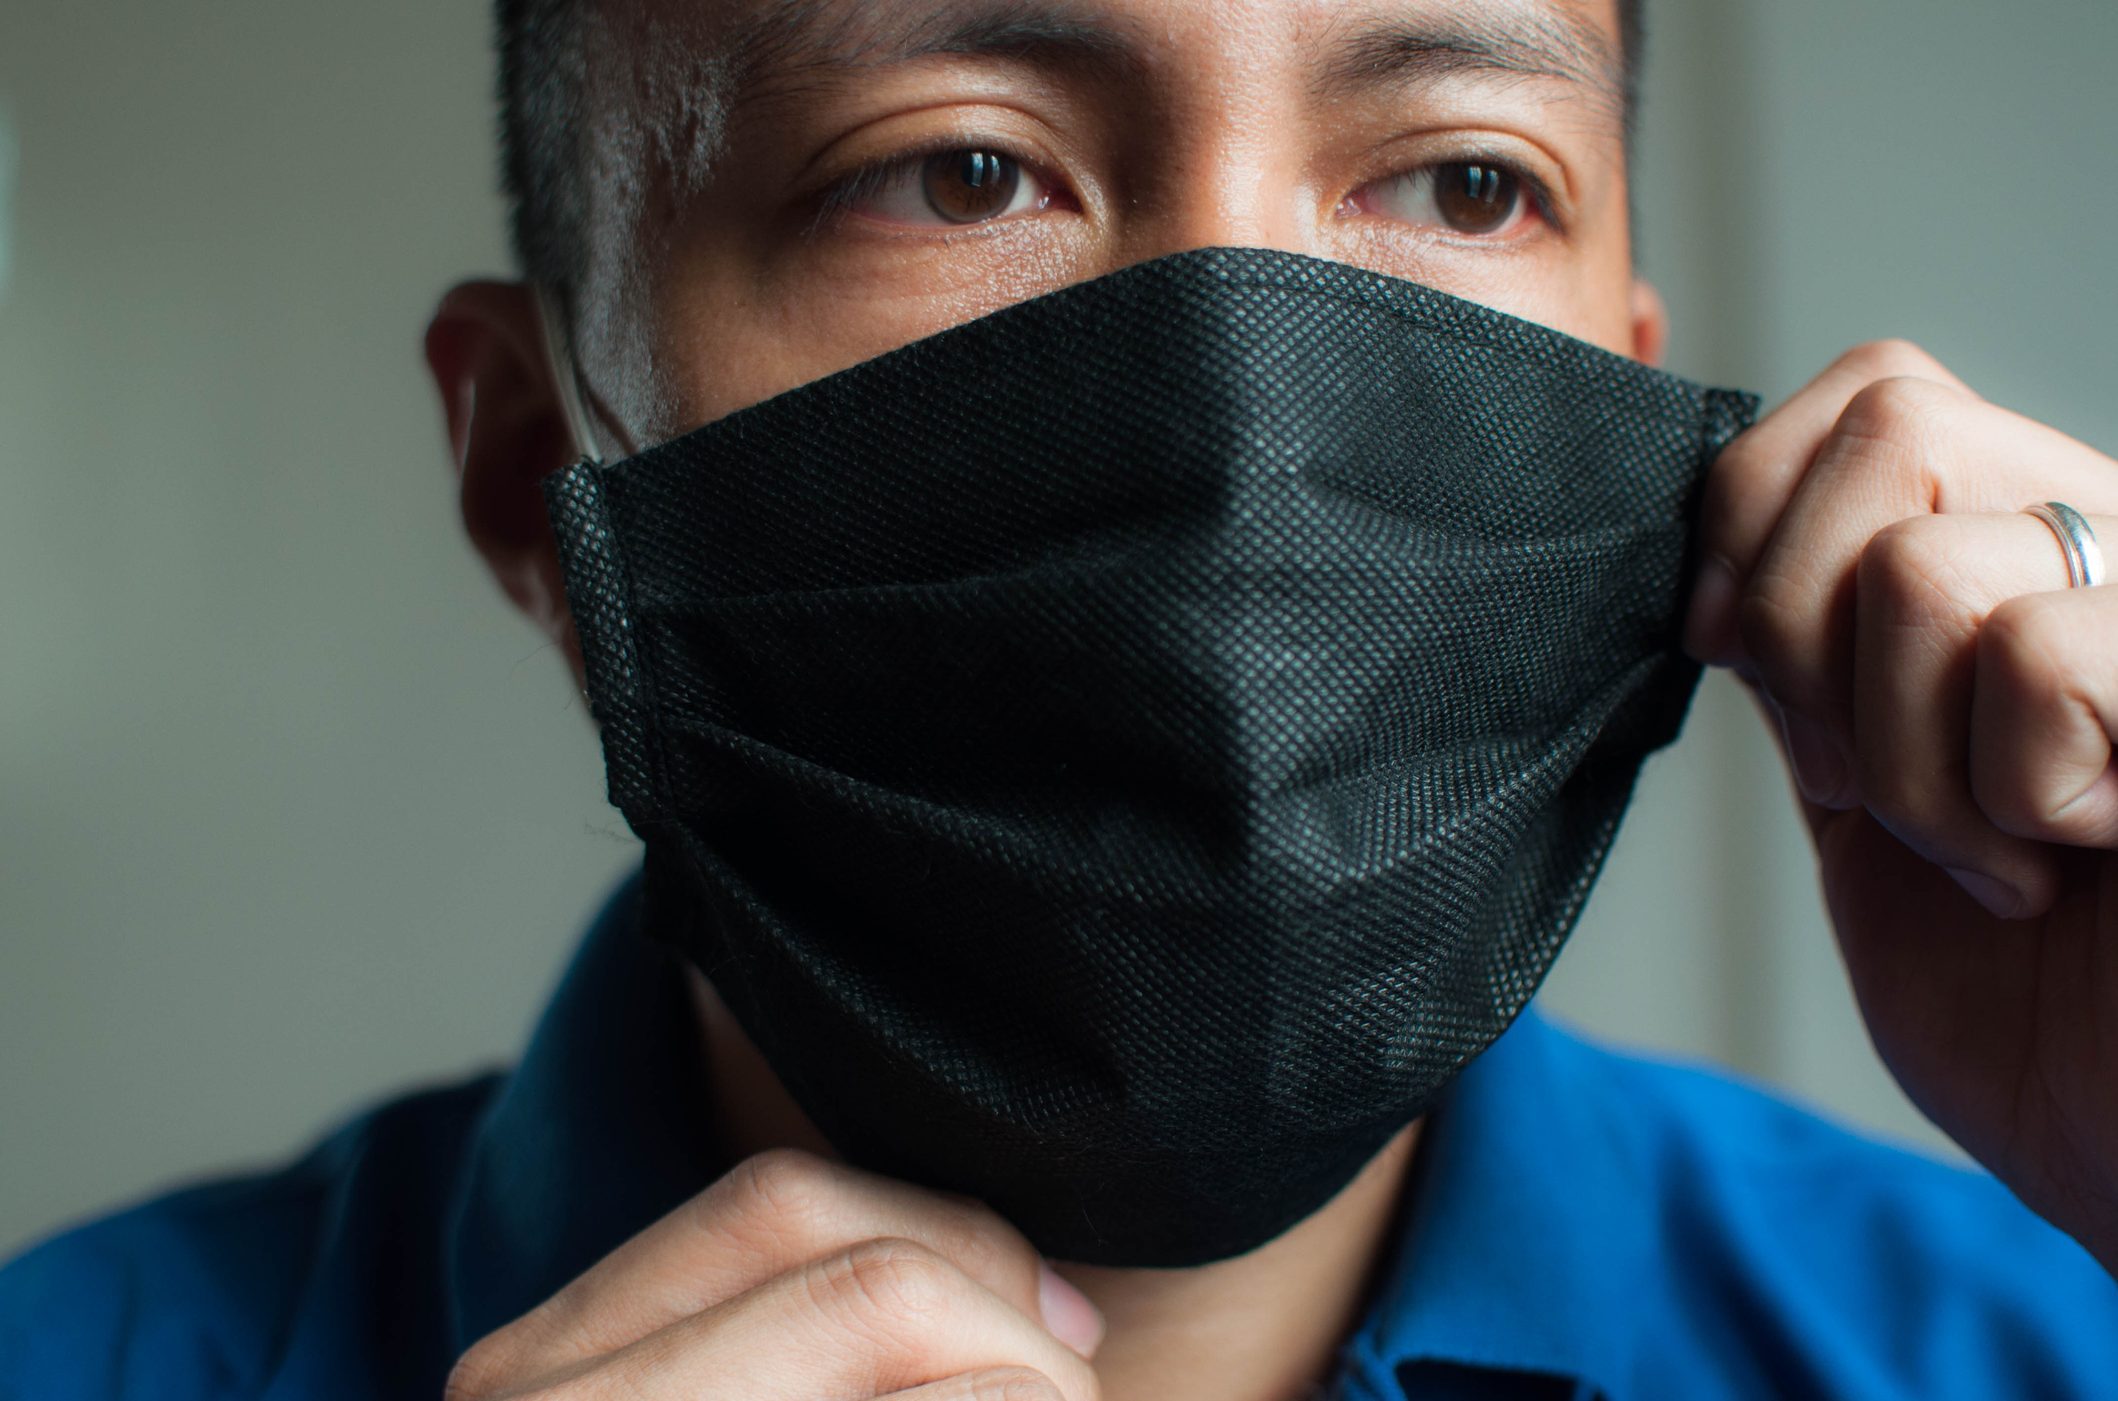 A young Southeast Asian man is wearing a black protective face mask during the "new normal" in coronavirus pandemic